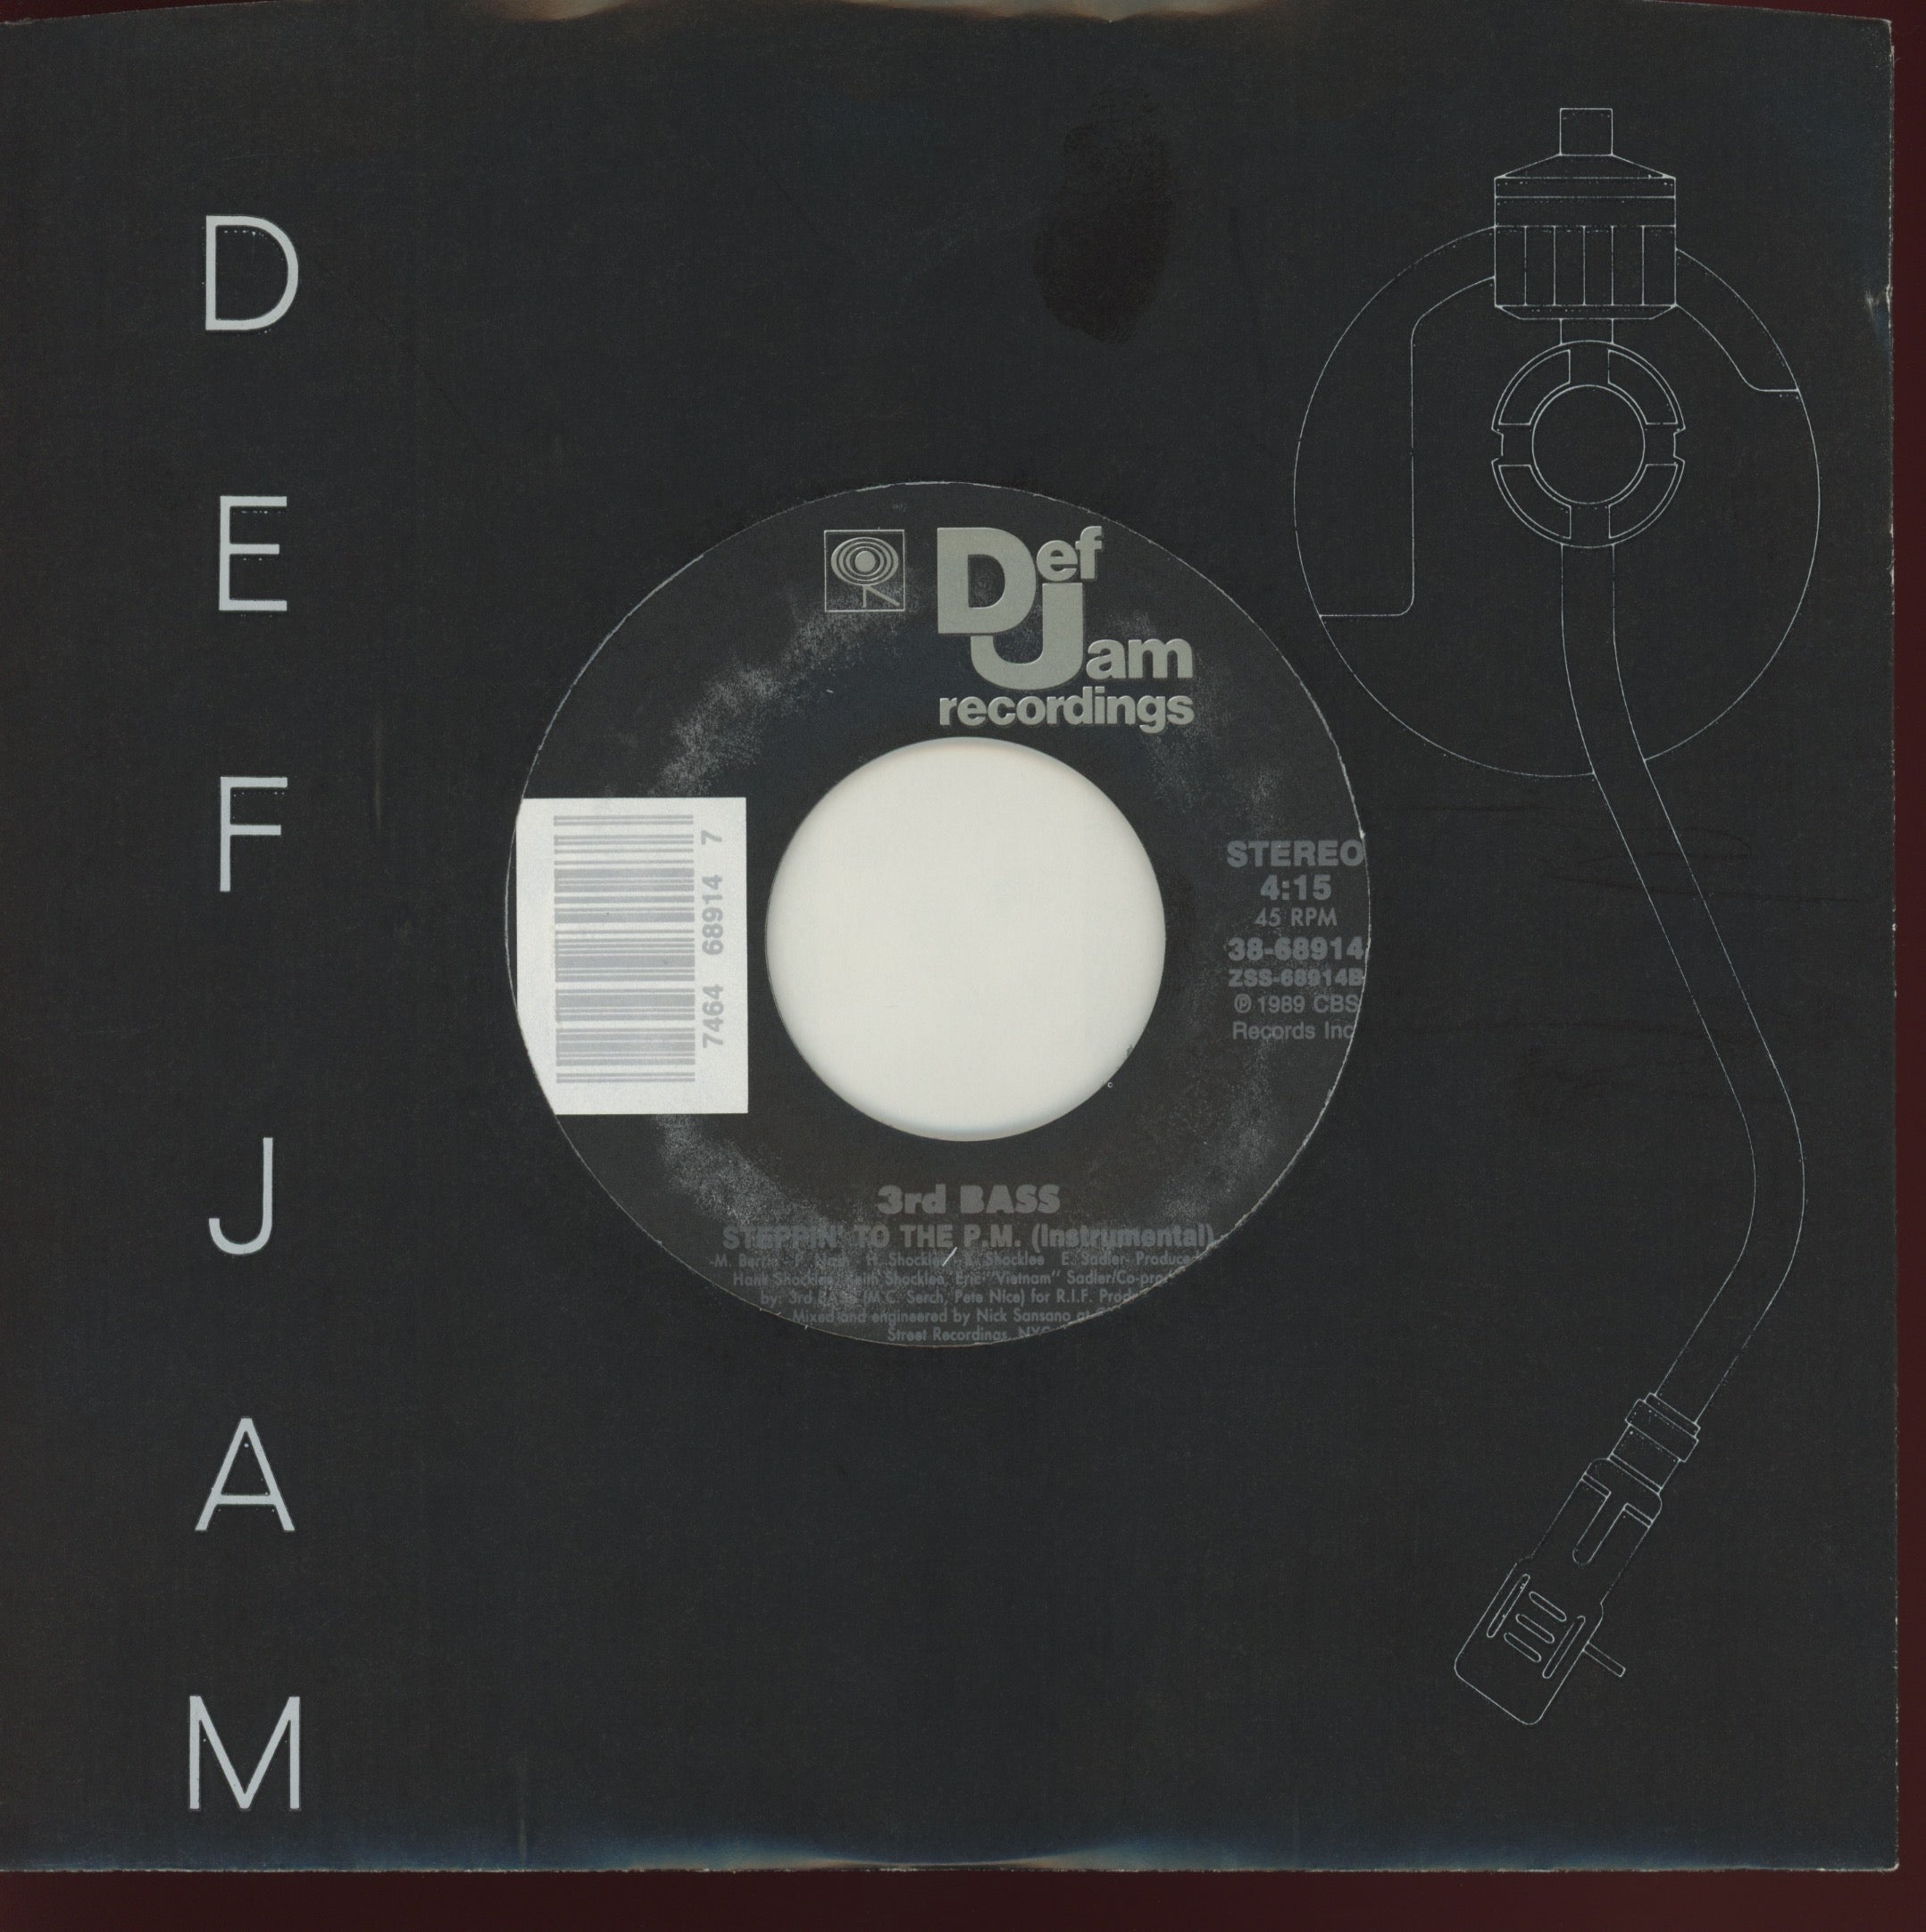 3rd Bass - Steppin' To The A.M. on Def Jam